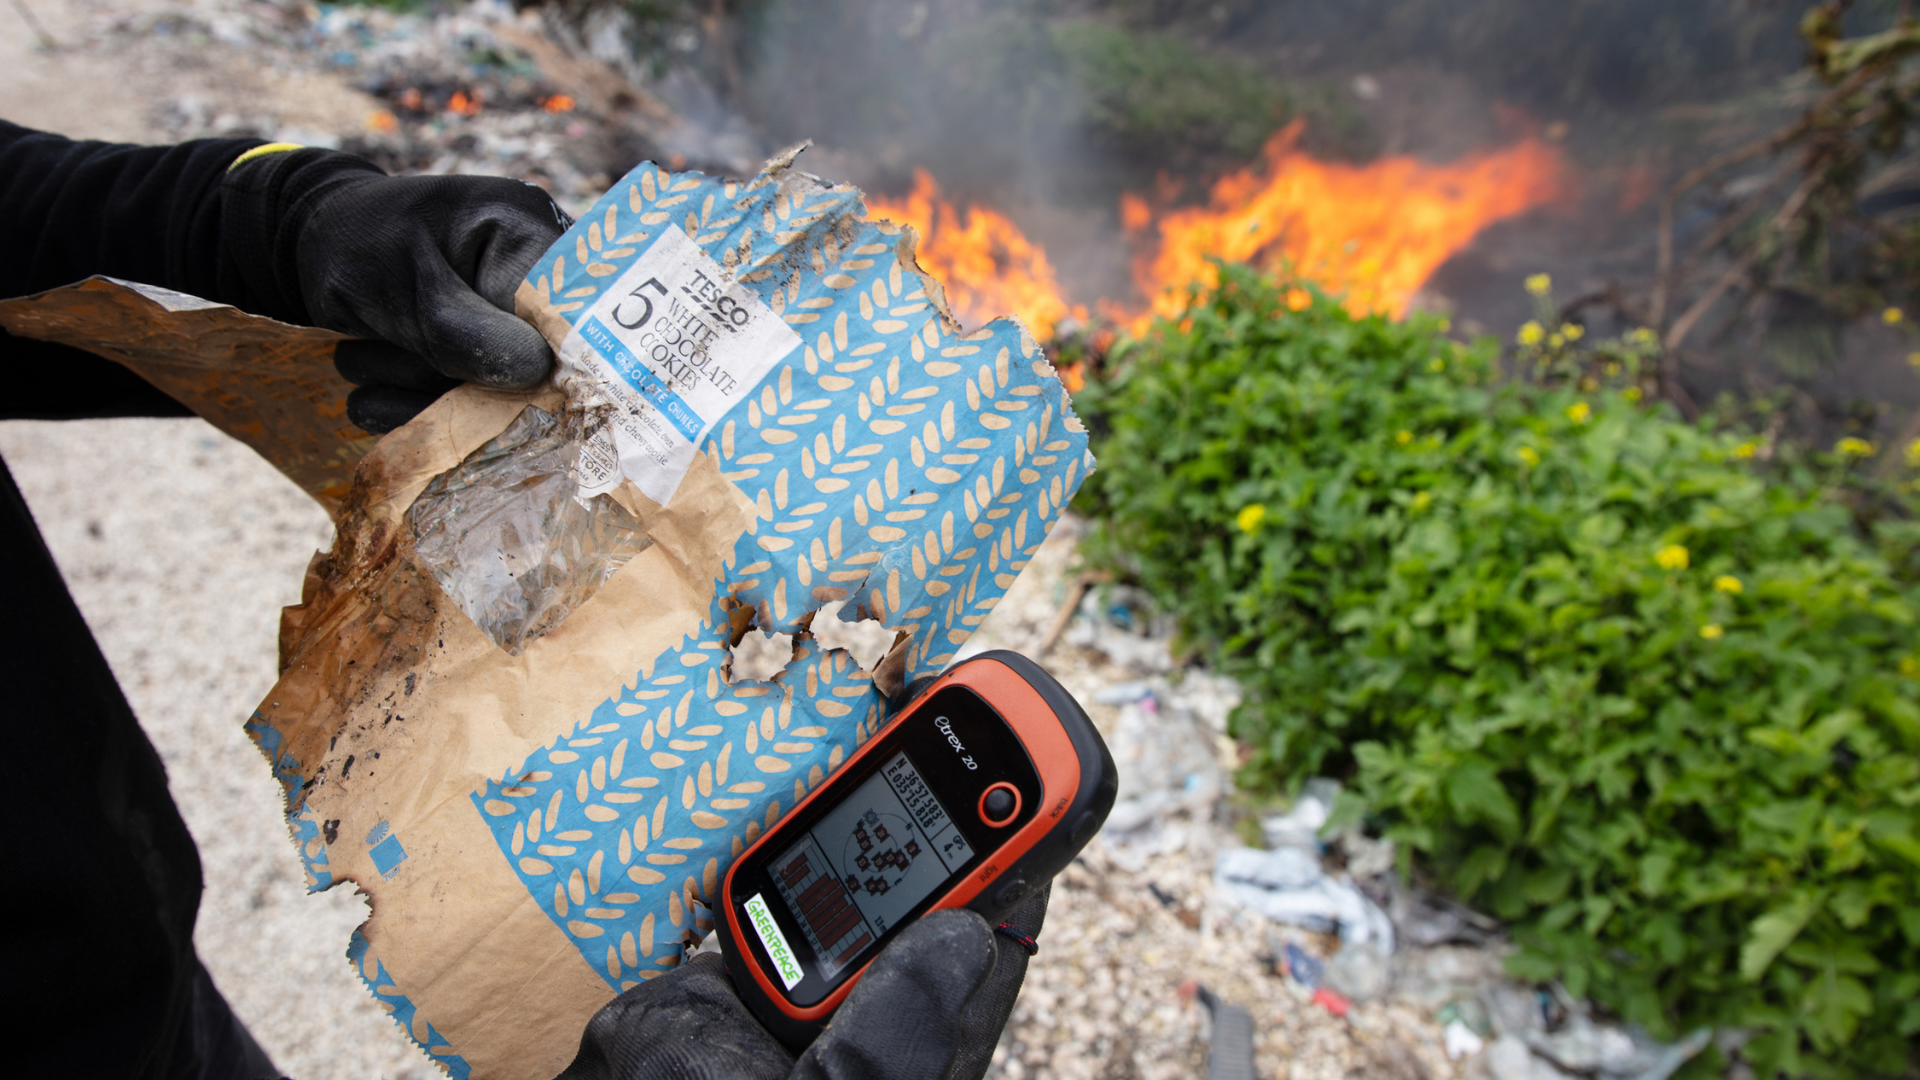 Yenidam, Seyhan, Adana Province, Turkey. Investigation into plastic waste that is dumped and burned in Turkey. The team found plastic packaging from UK, German and global food and drinks brands and supermarkets. Image credit: Greenpeace